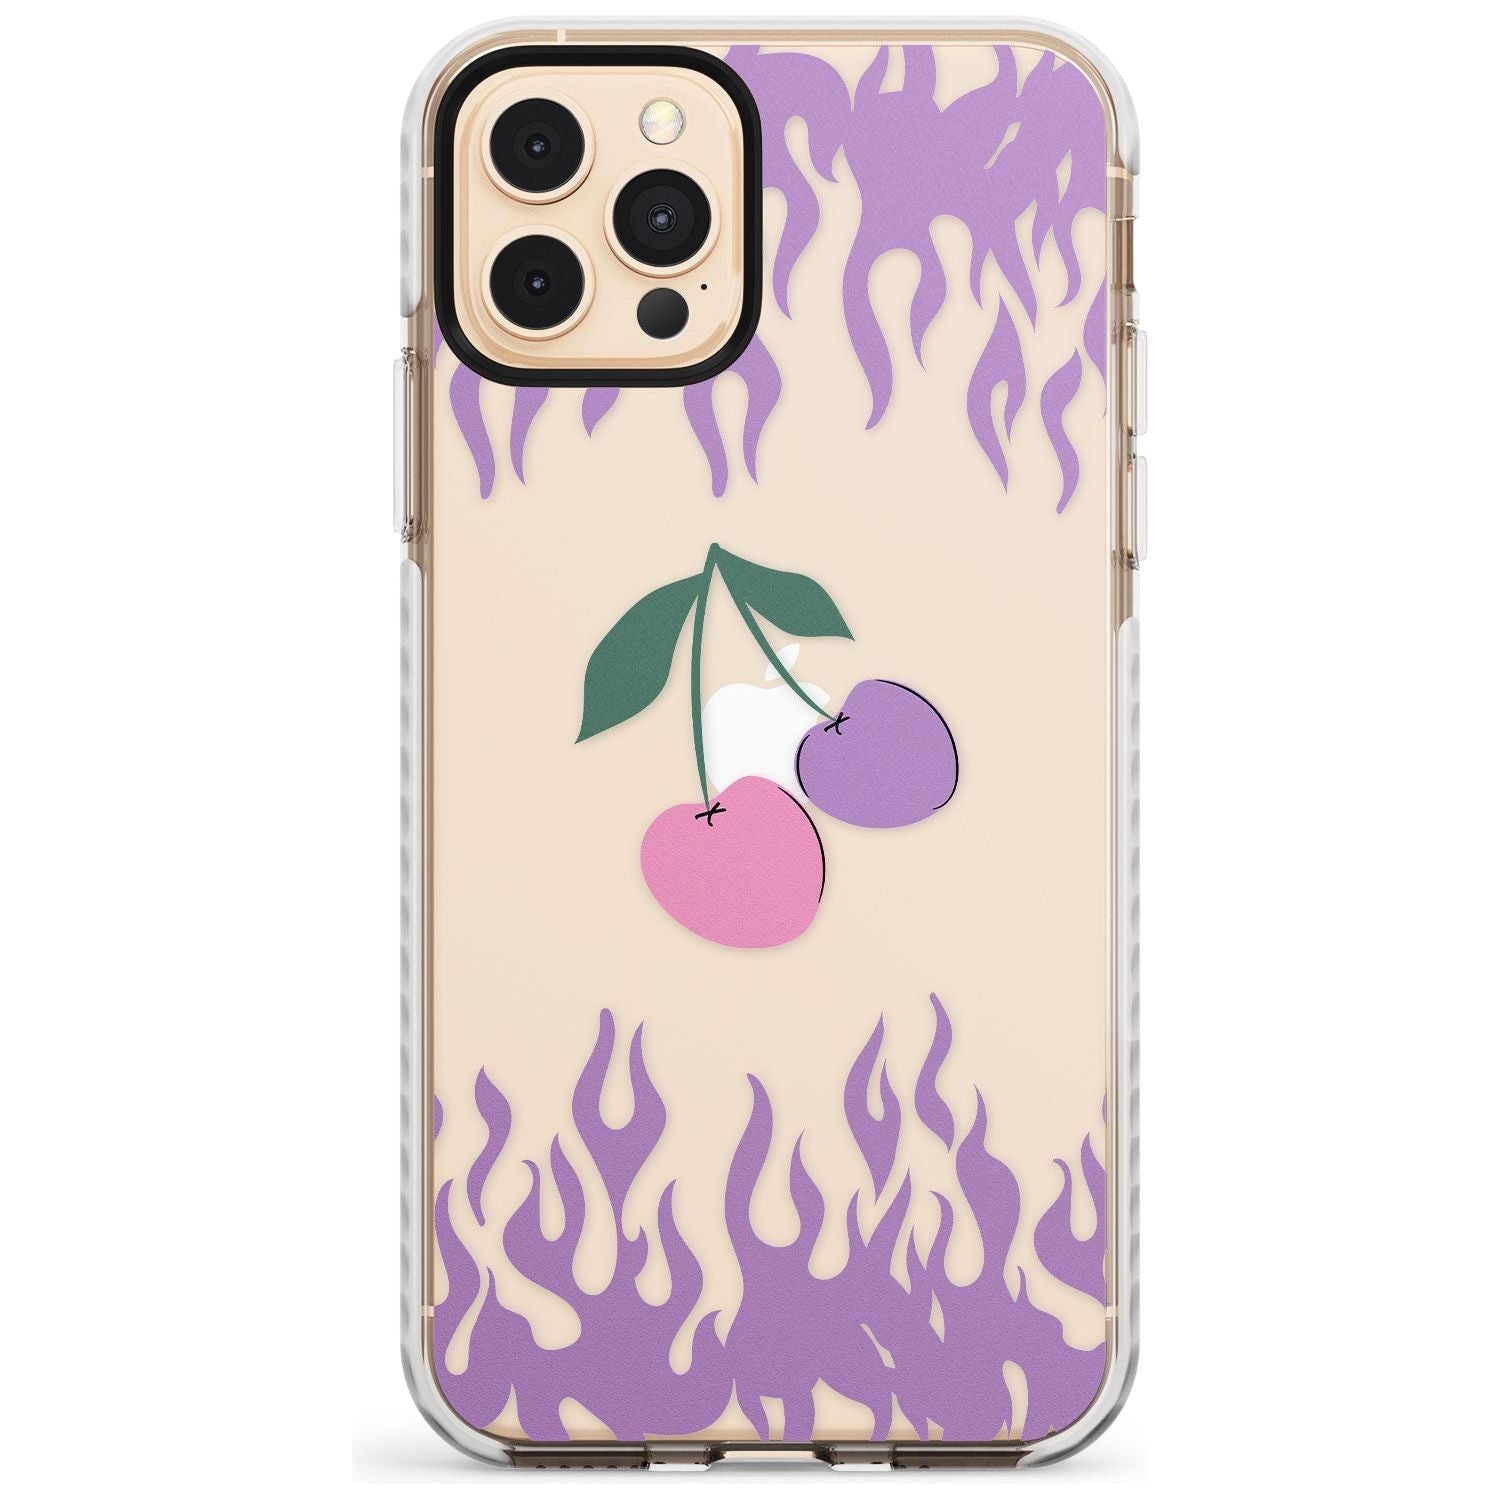 Cherries n' Flames Impact Phone Case for iPhone 11 Pro Max